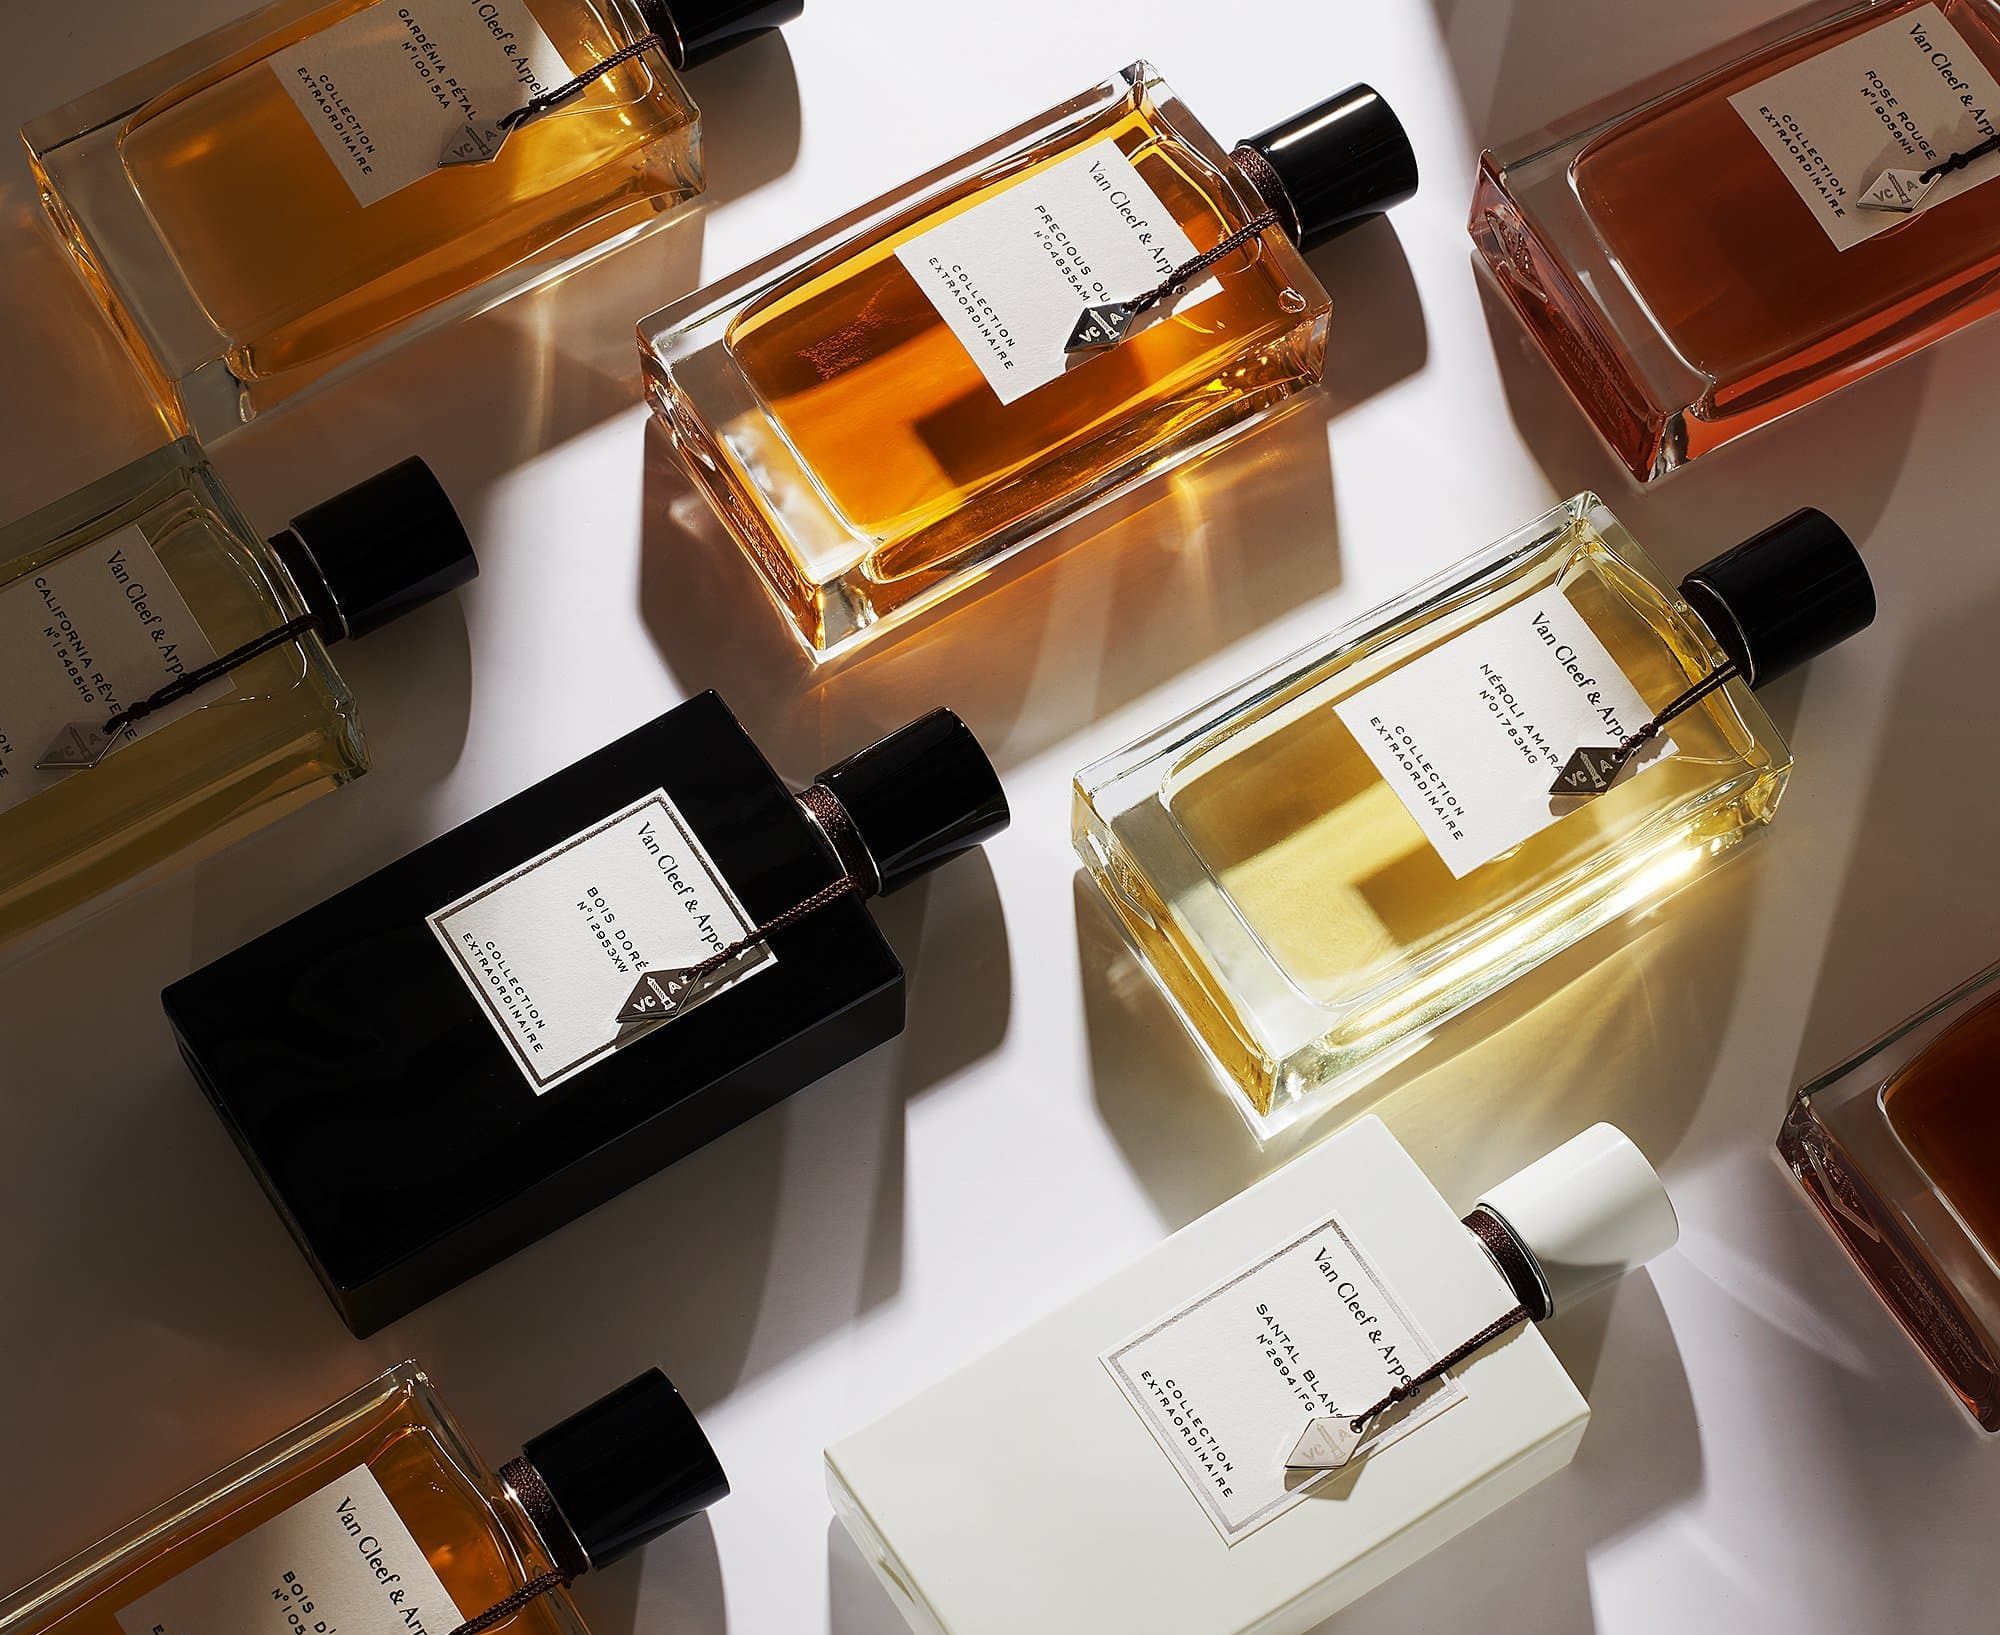 Interparfums confirms its 2022 objectives - Luxus Plus